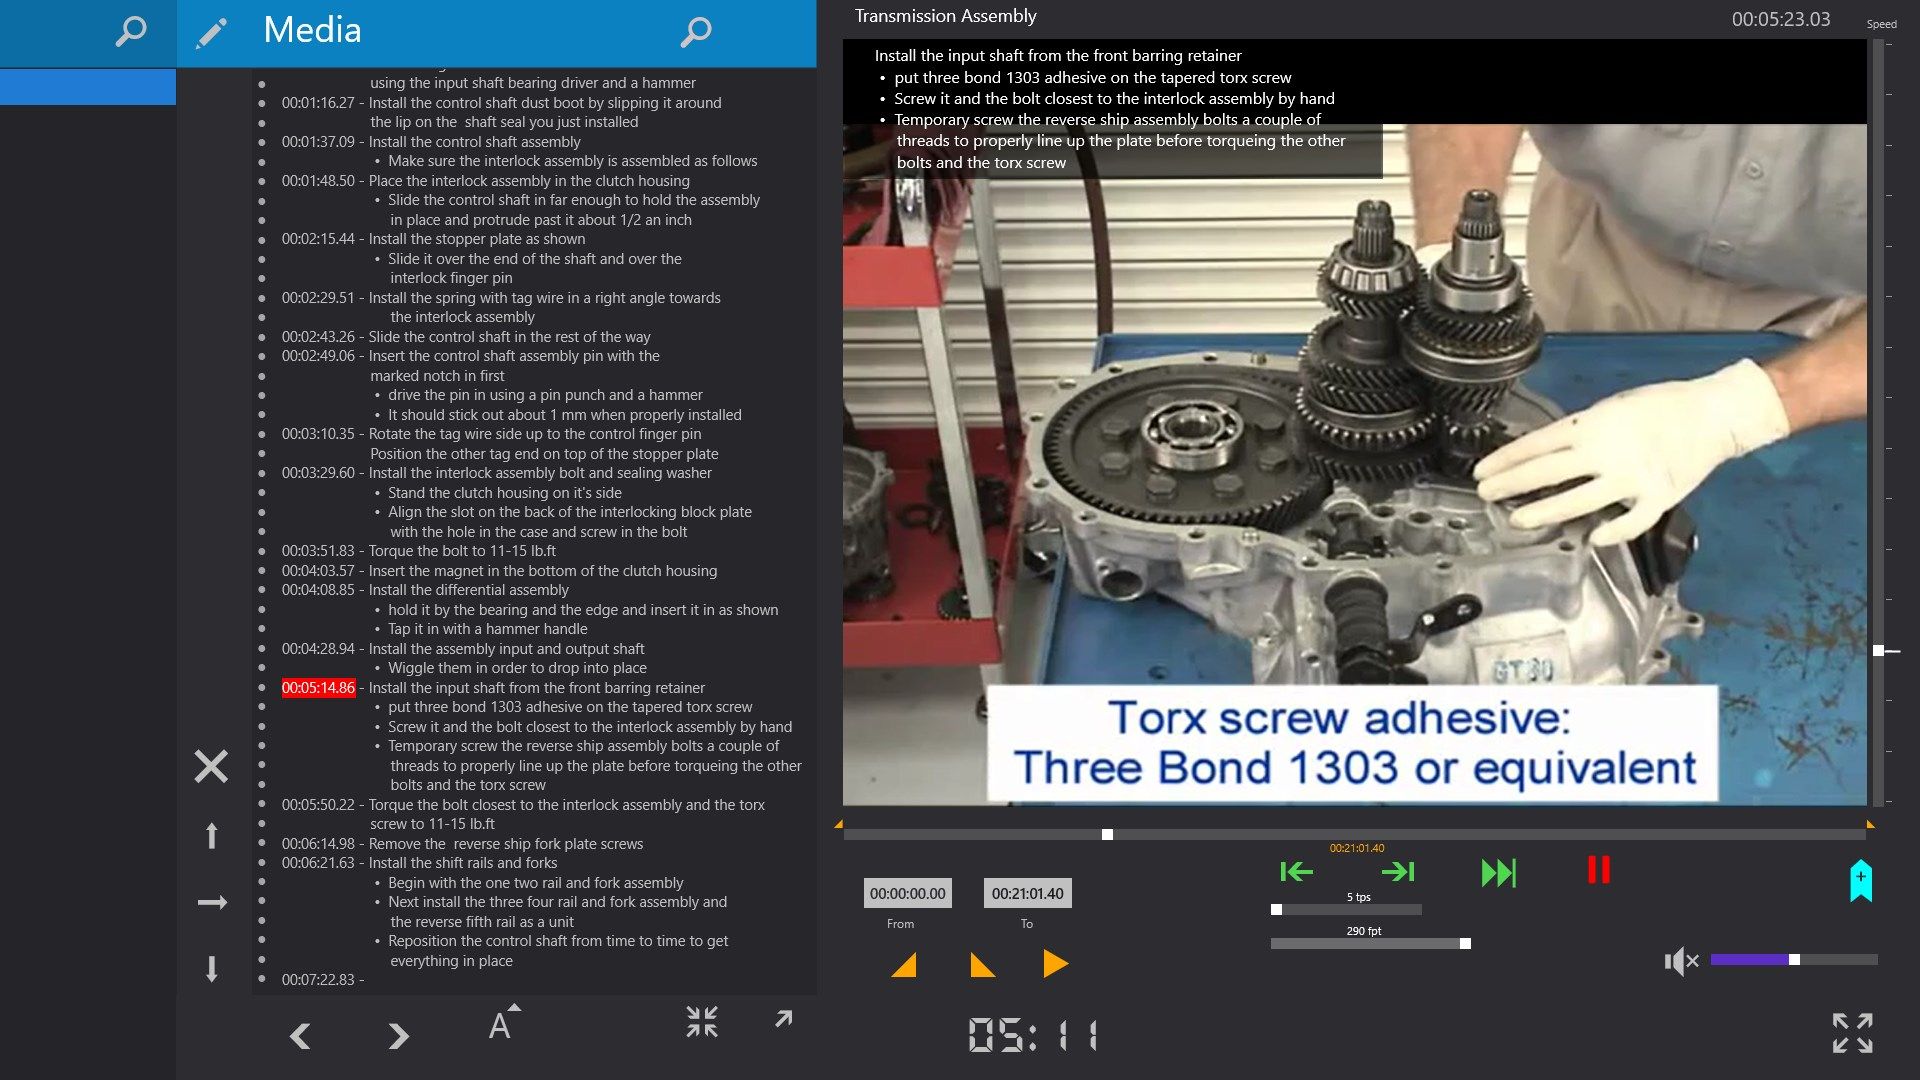 Transmission Assembly training video with built in written instructions that is synchronized to the video